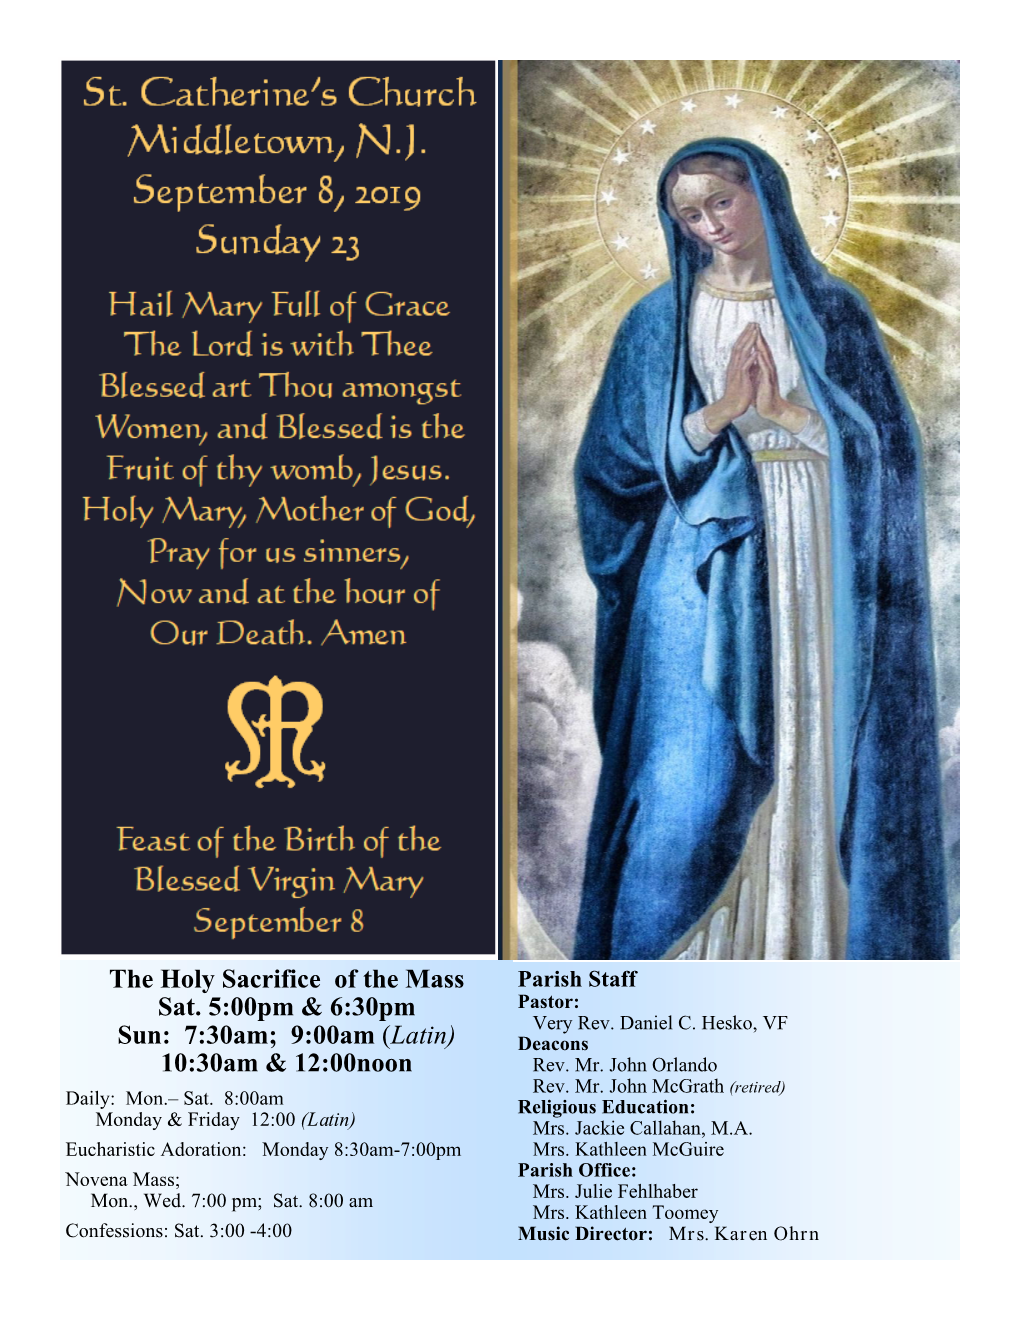 The Holy Sacrifice of the Mass Sat. 5:00Pm & 6